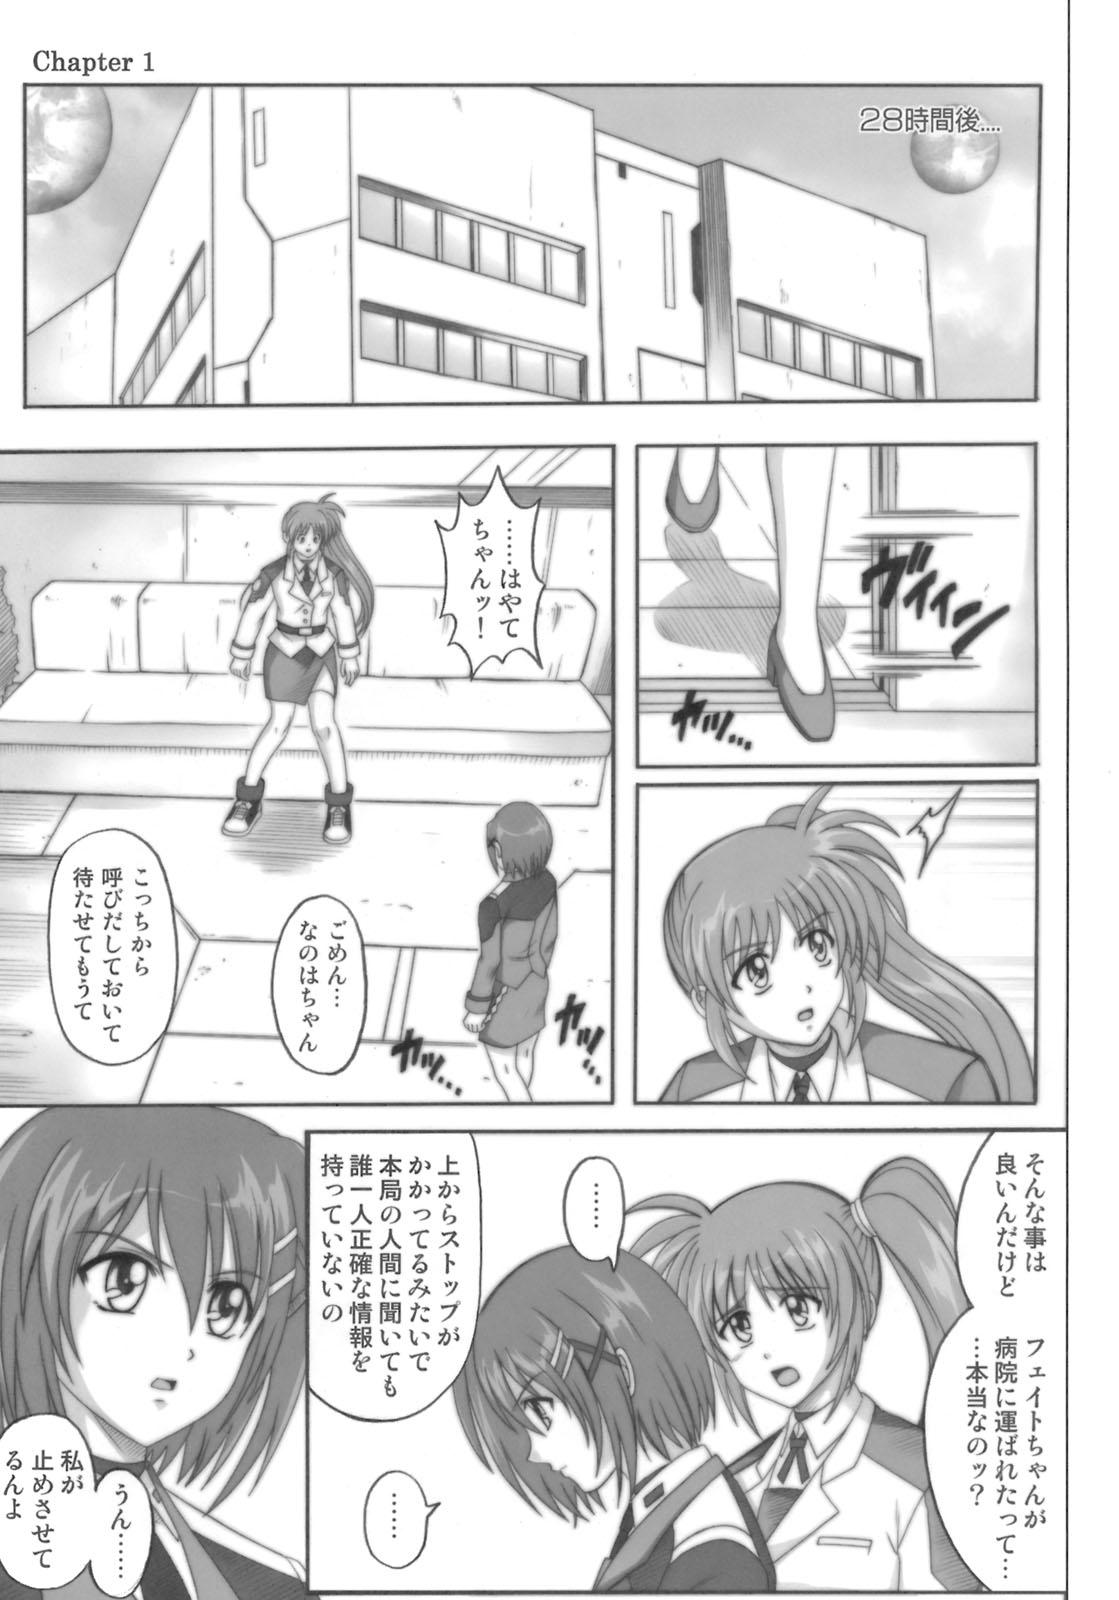 European Porn 850 - Color Classic Situation Note Extention - Mahou shoujo lyrical nanoha Spit - Page 4